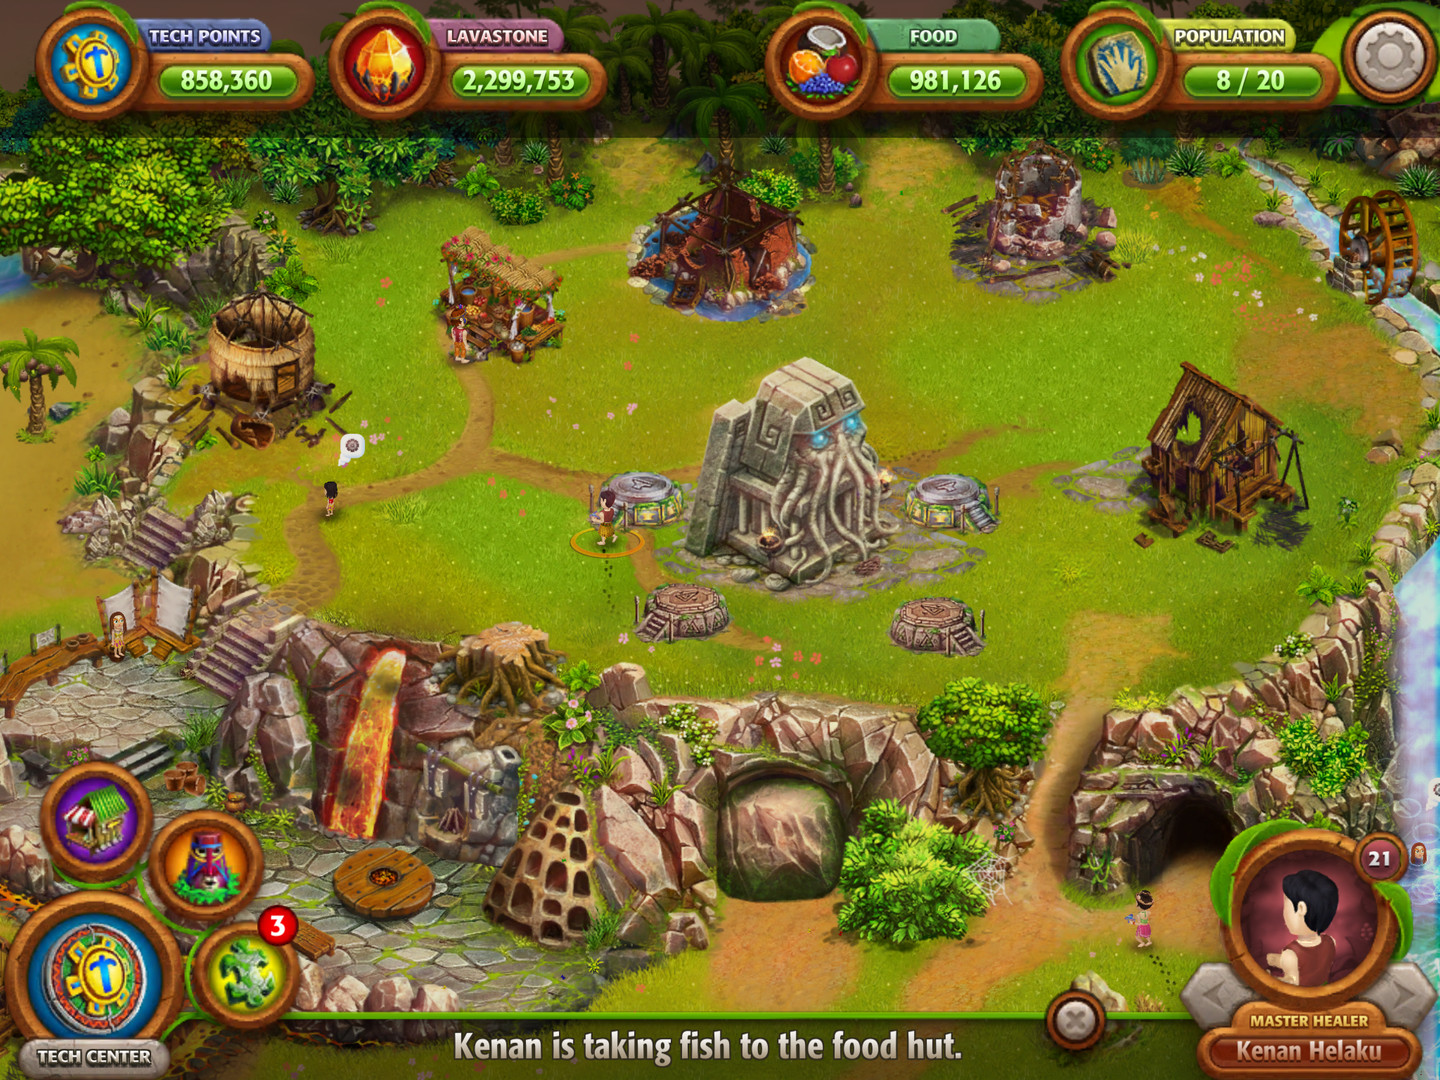 virtual villagers full version free download for pc